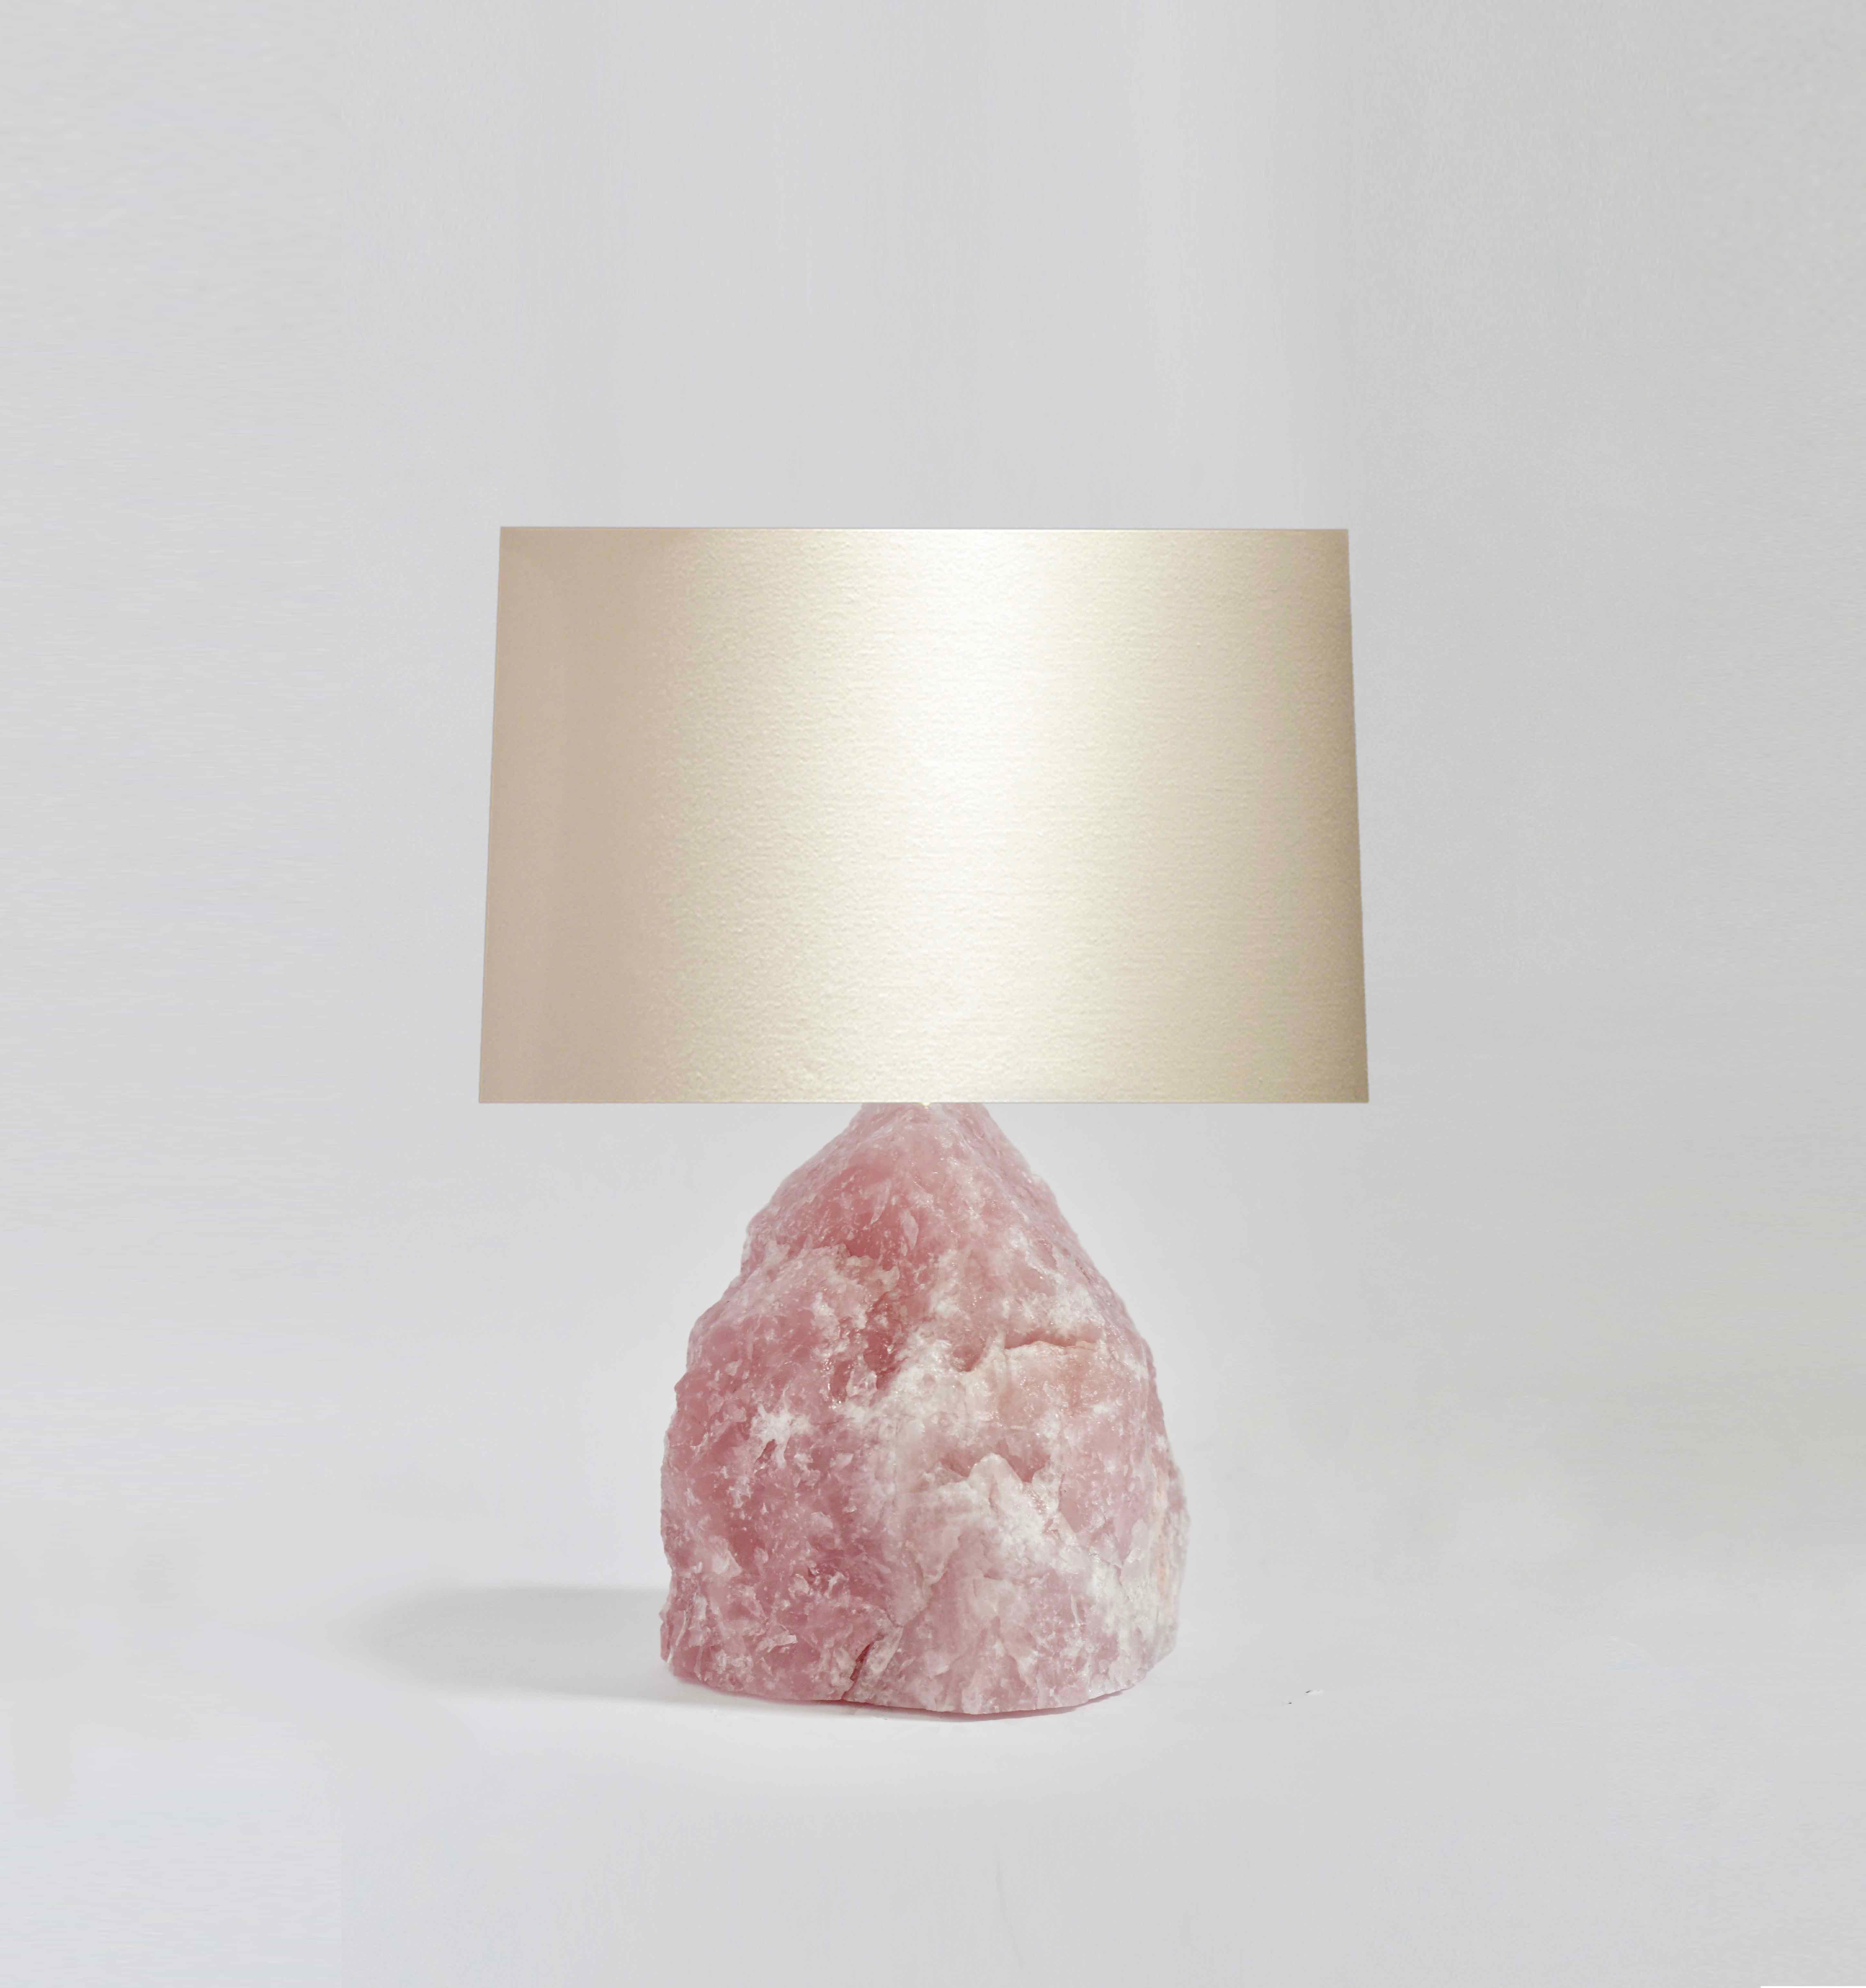 Pair of Natural Rose Quartz Rock Crystal Quartz Lamp, created by Phoenix Gallery, NYC.
To the rock crystal: 12